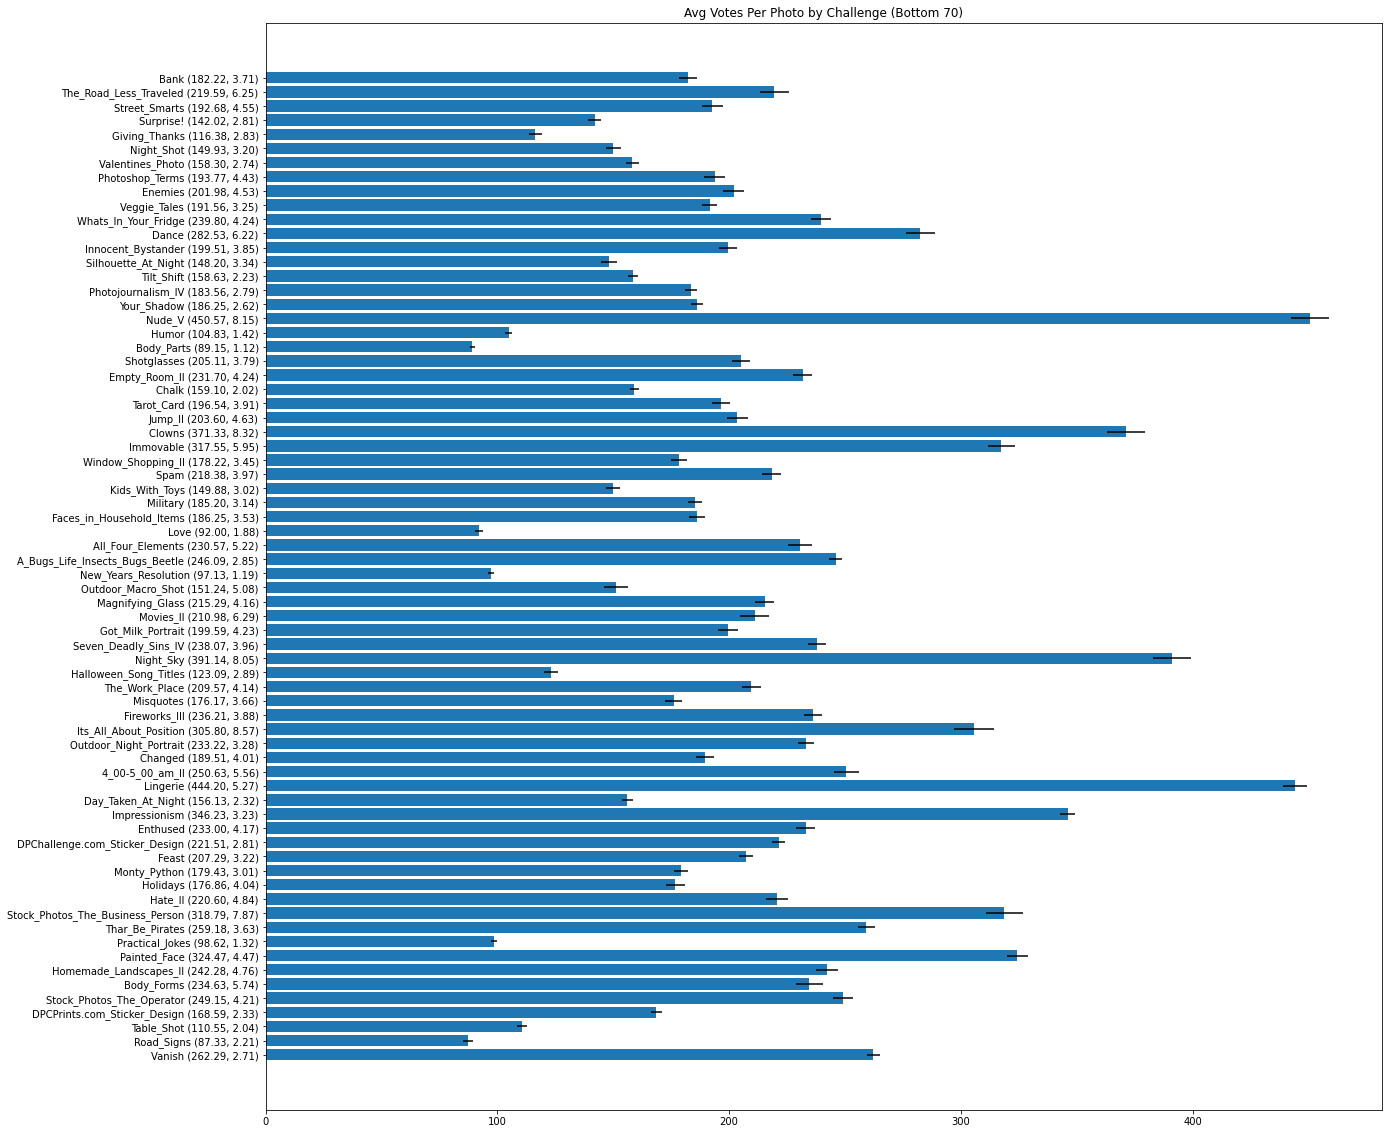 A list of the bottom 70 least popular challenges in the AVA dataset presented in descending order by number of photo submissions, showcasing the average votes per photo with standard deviation.